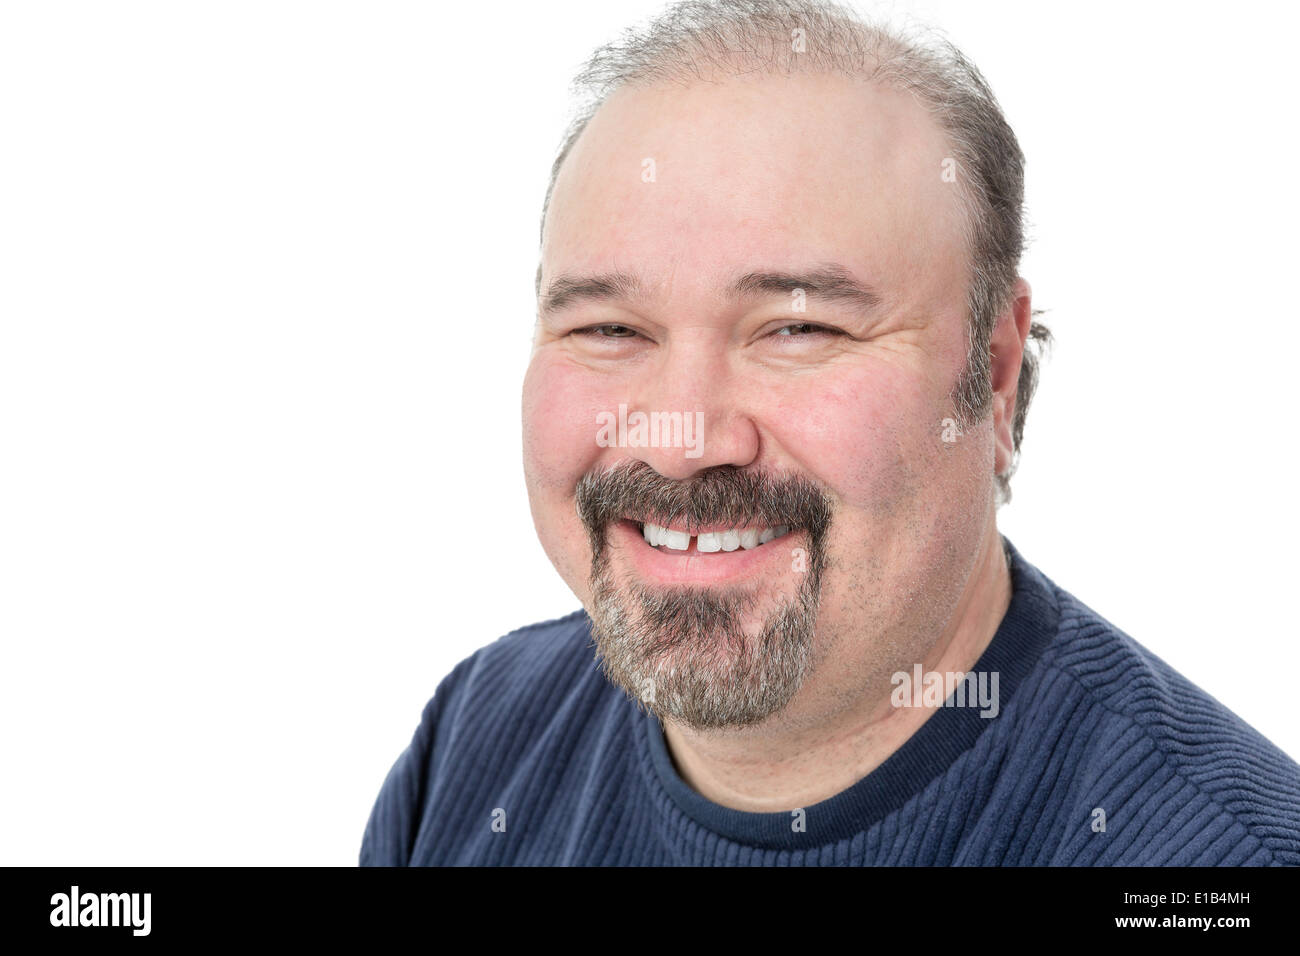 Closeup portrait of a middle-aged man with a goatee enjoying a good laugh smiling happily at the camera isolated on white with c Stock Photo